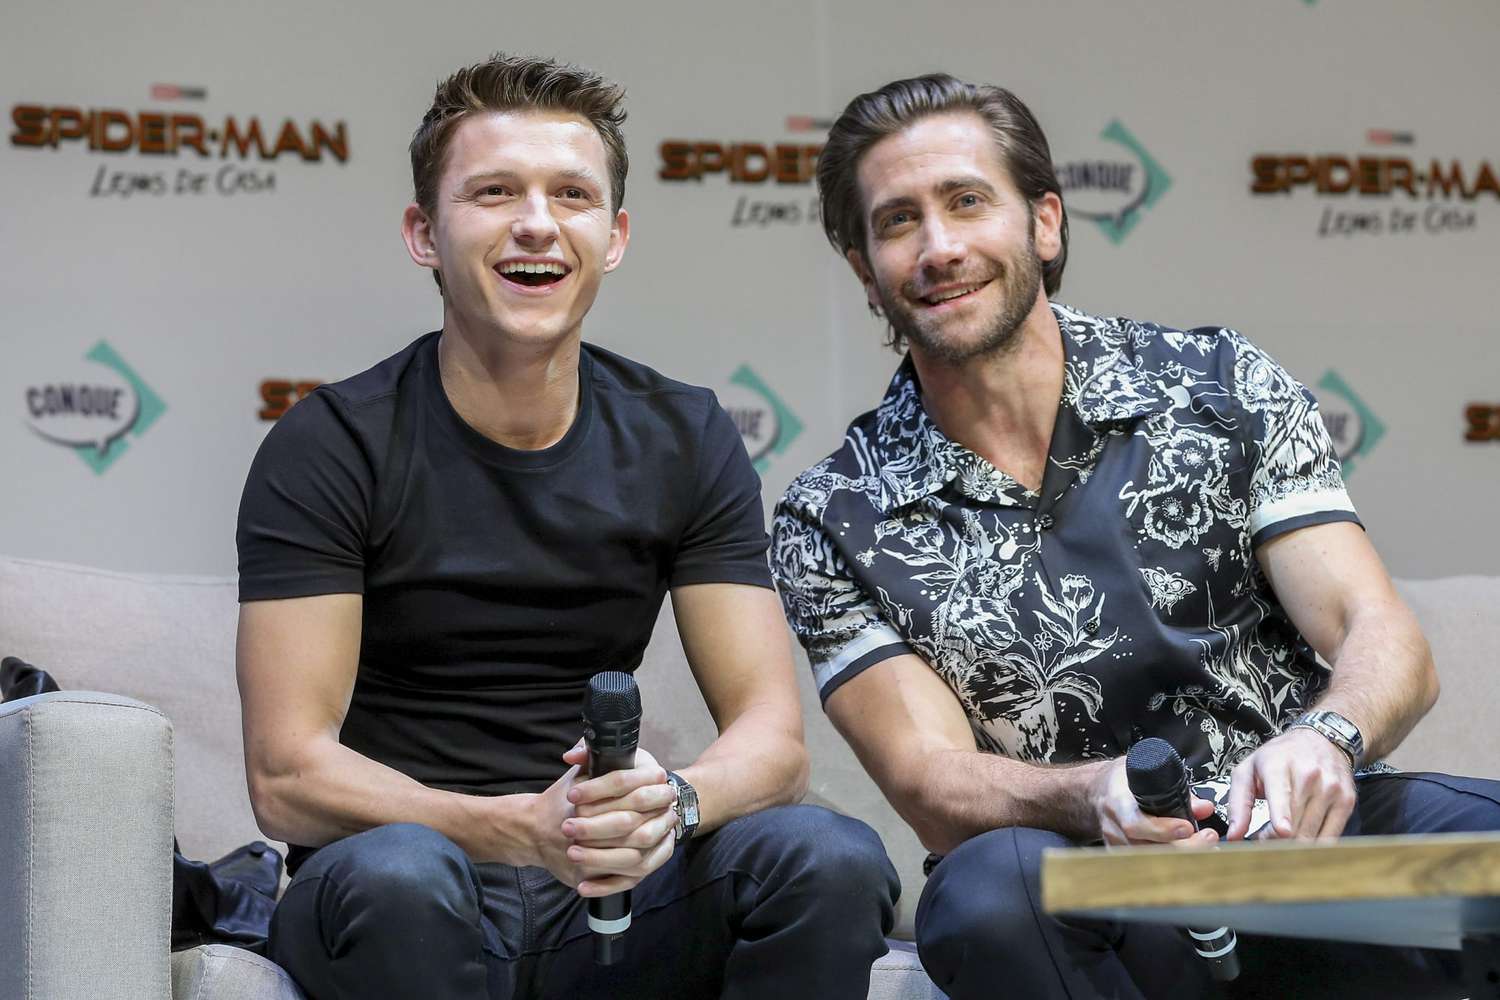 QUERETARO, MEXICO - MAY 04: Tom Holland and Jake Gyllenhaal attend Conque 2019 to present the new film "Spider-Man: Far From Home" at Centro de Congresos on May 4, 2019 in Queretaro, Mexico. (Photo by Victor Chavez/Getty Images)